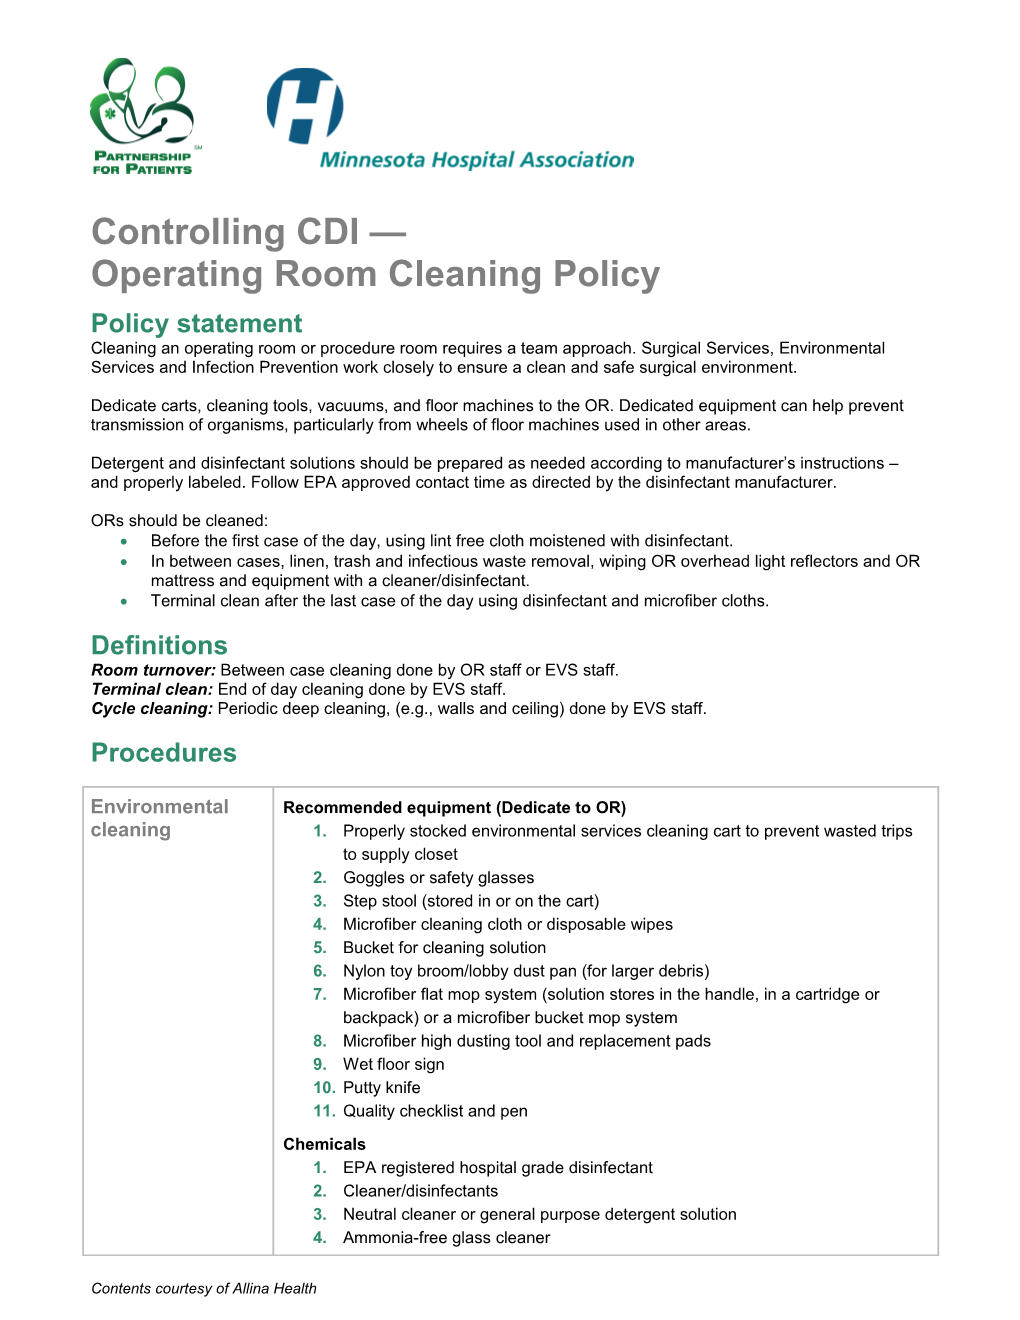 Controlling CDI Operating Room Cleaning Policy